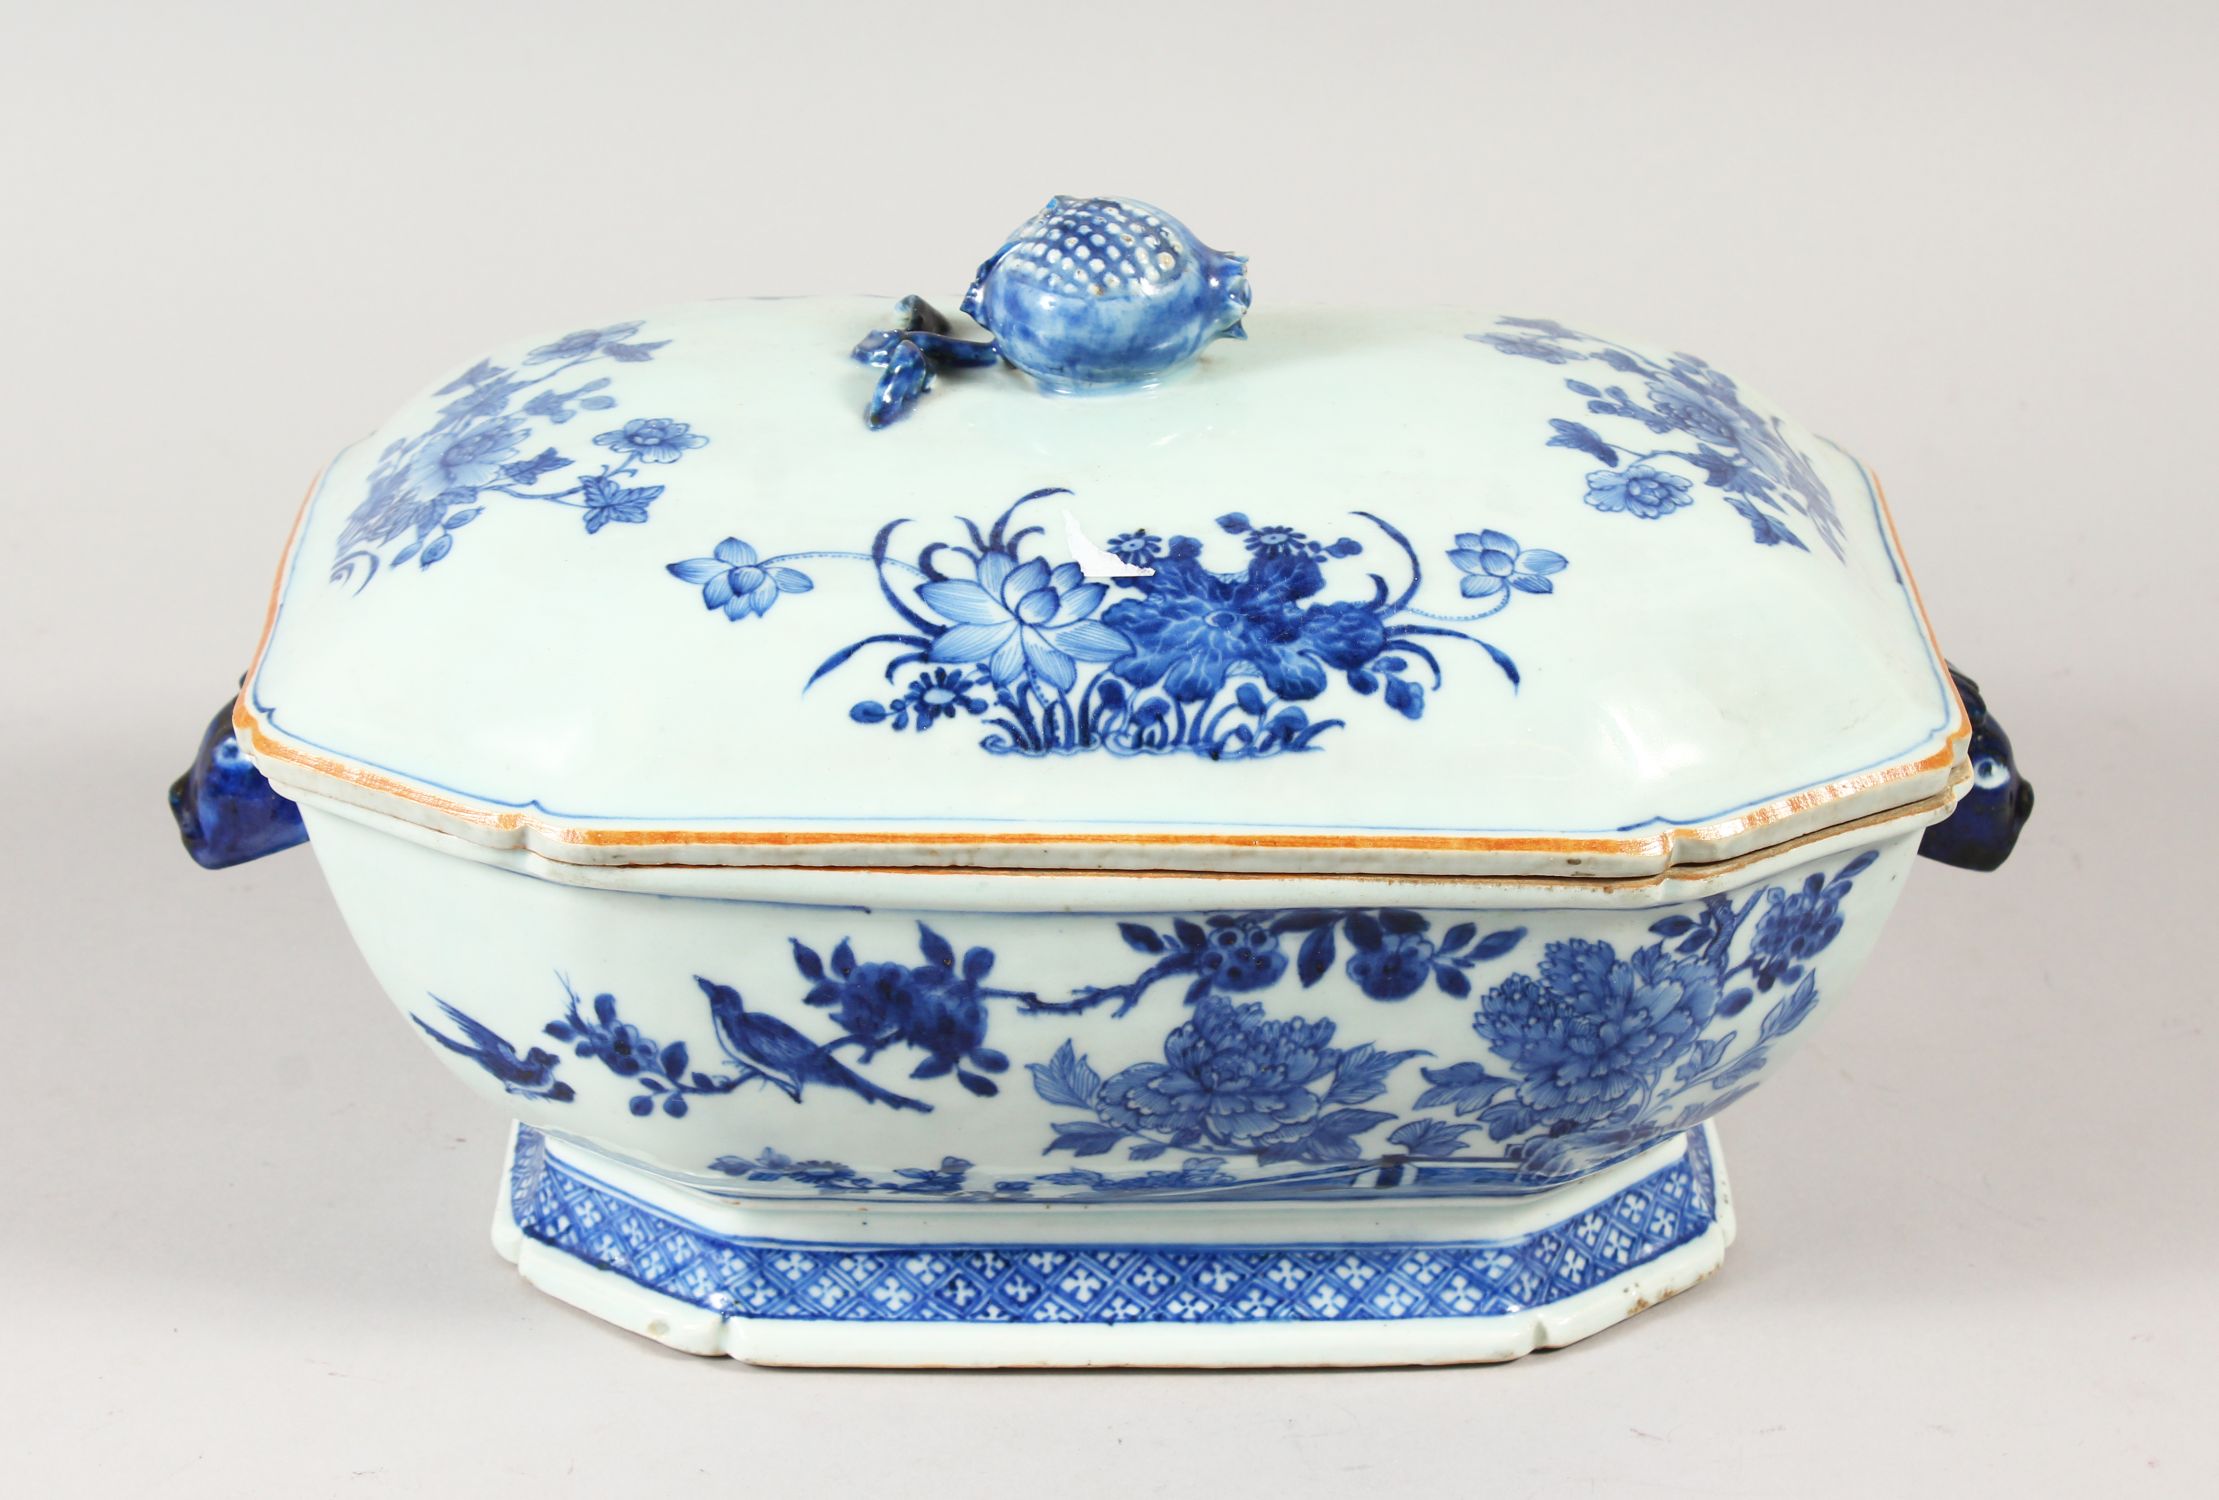 AN 18TH CENTURY CHINESE QIANLONG PERIOD BLUE & WHITE PORCELAIN TUREEN & COVER, of chamfered